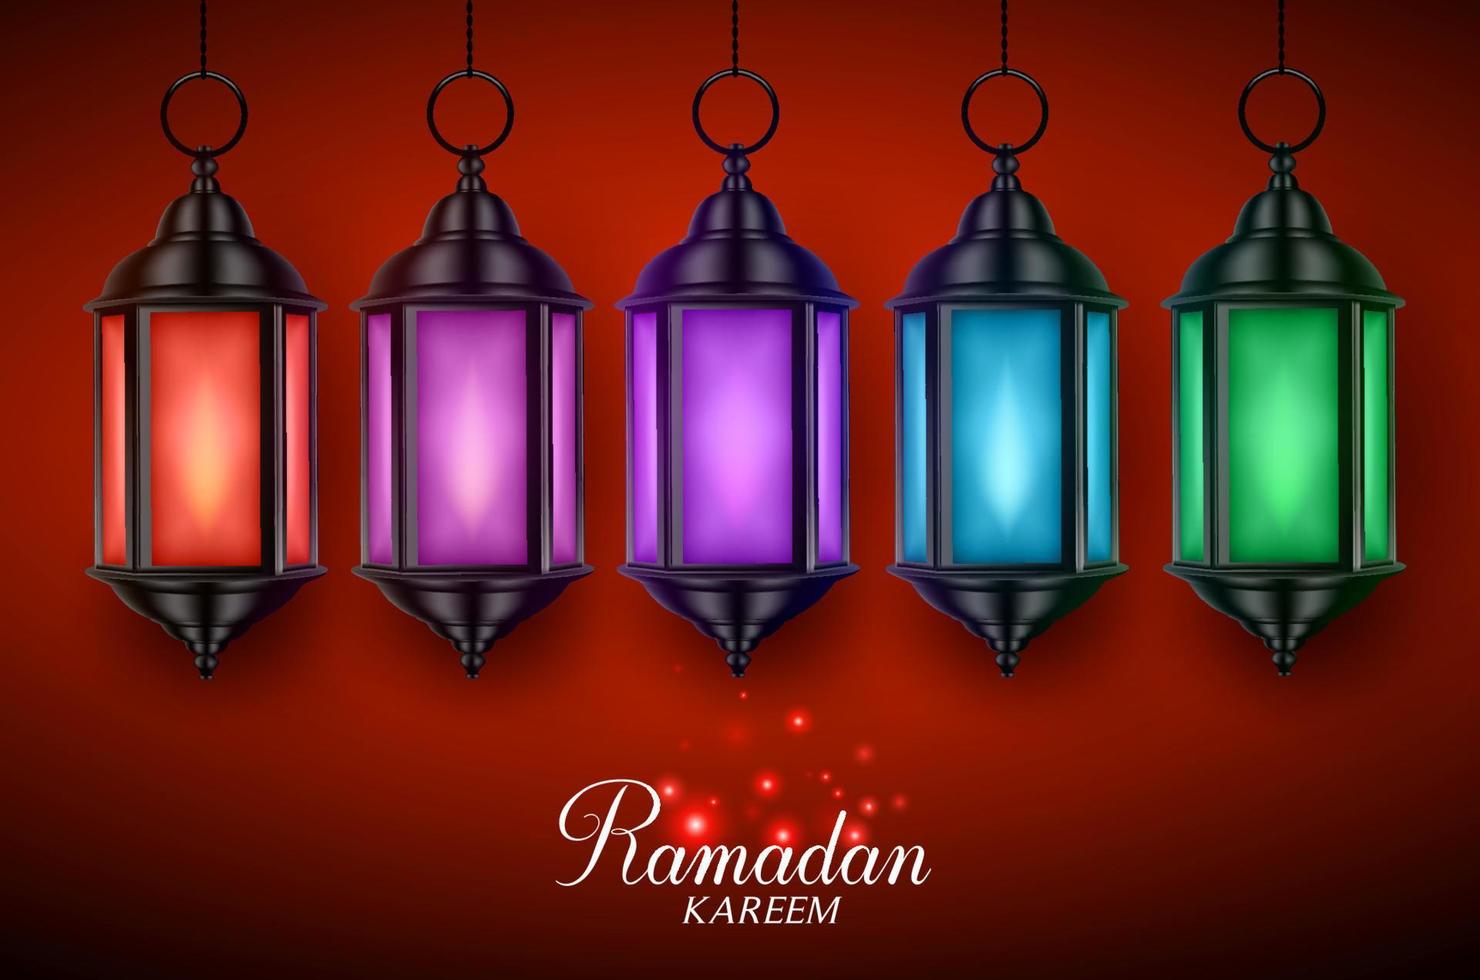 Lantern lamp or fanous vector set with colorful lights hanging in red dark background with ramadan kareem greetings